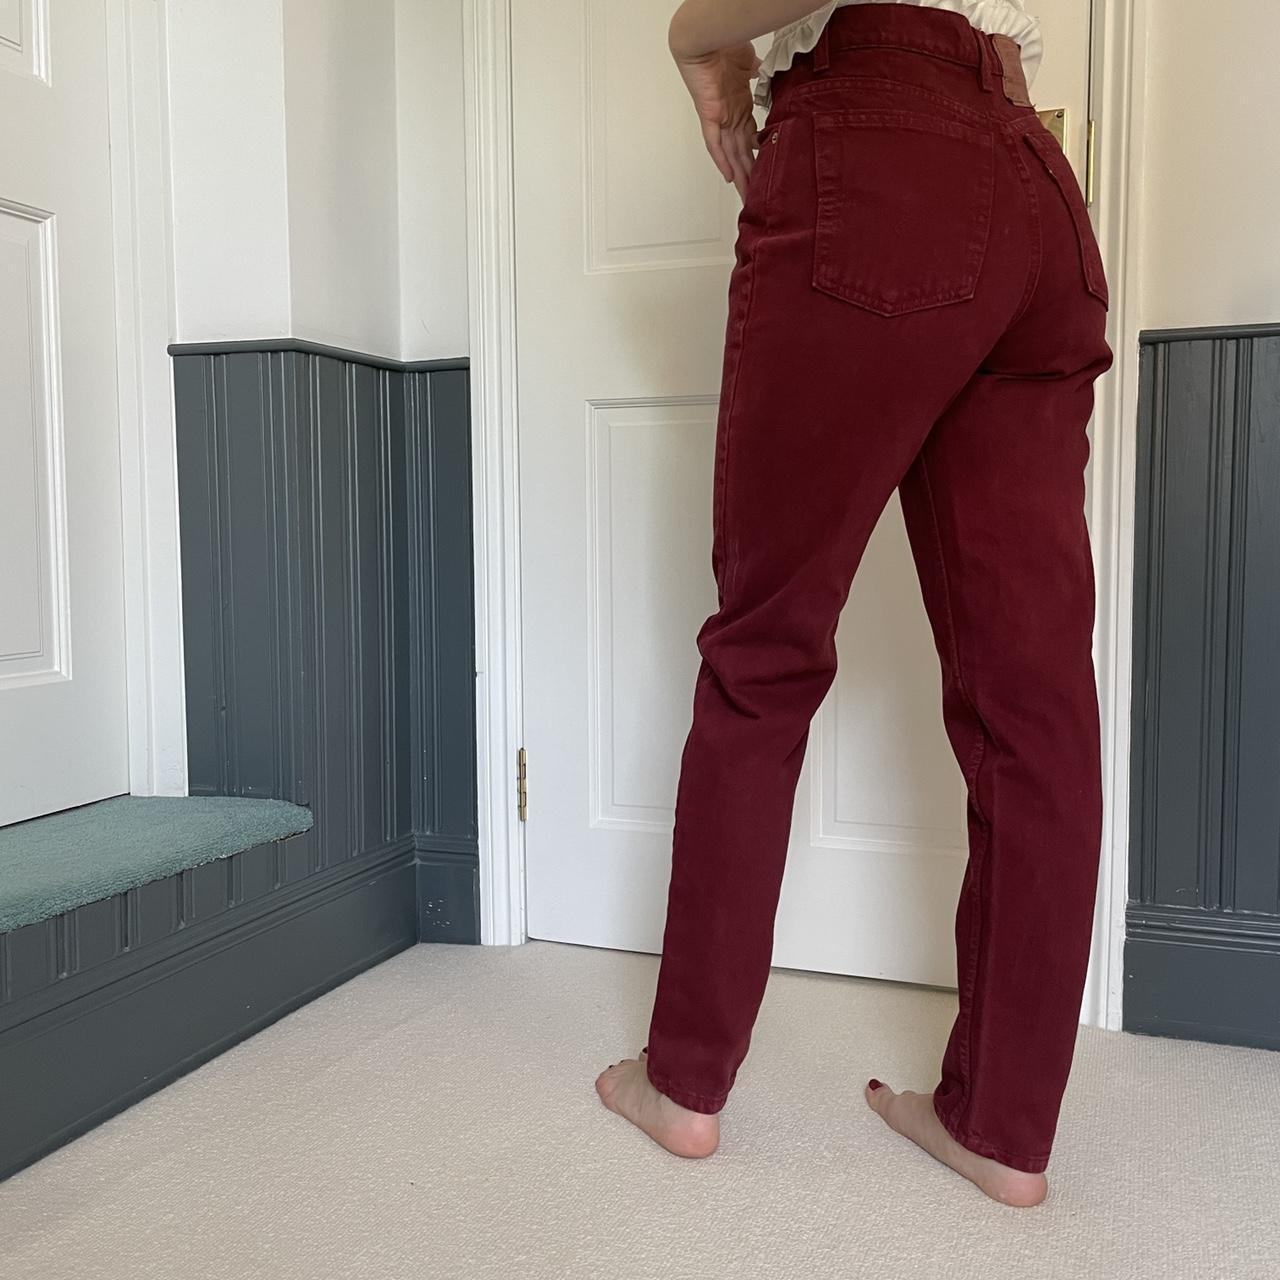 Levi's Women's Red and Burgundy Jeans | Depop